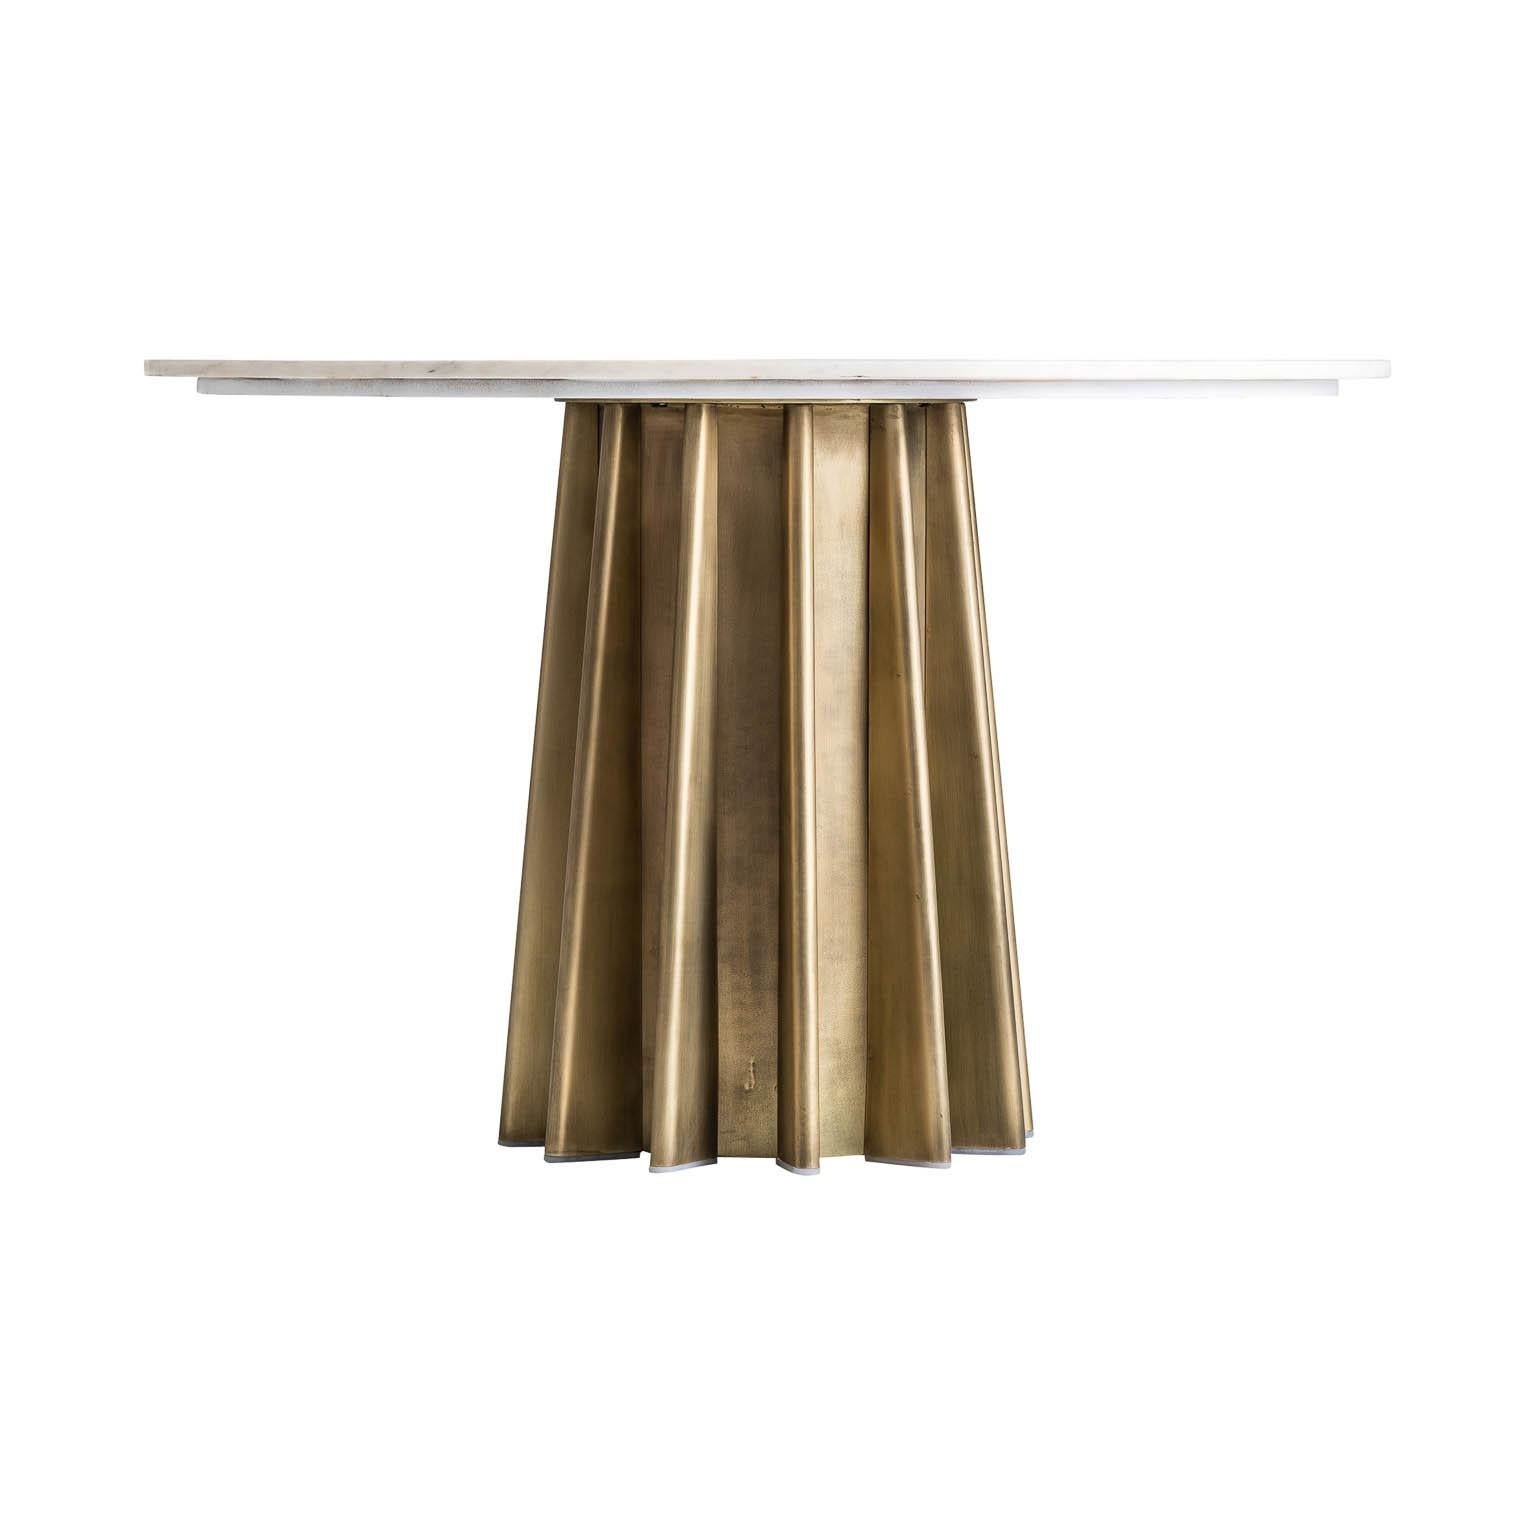 Italian design style round pedestal table consisting of a graphic gilded metal foot with a round white marble tray.